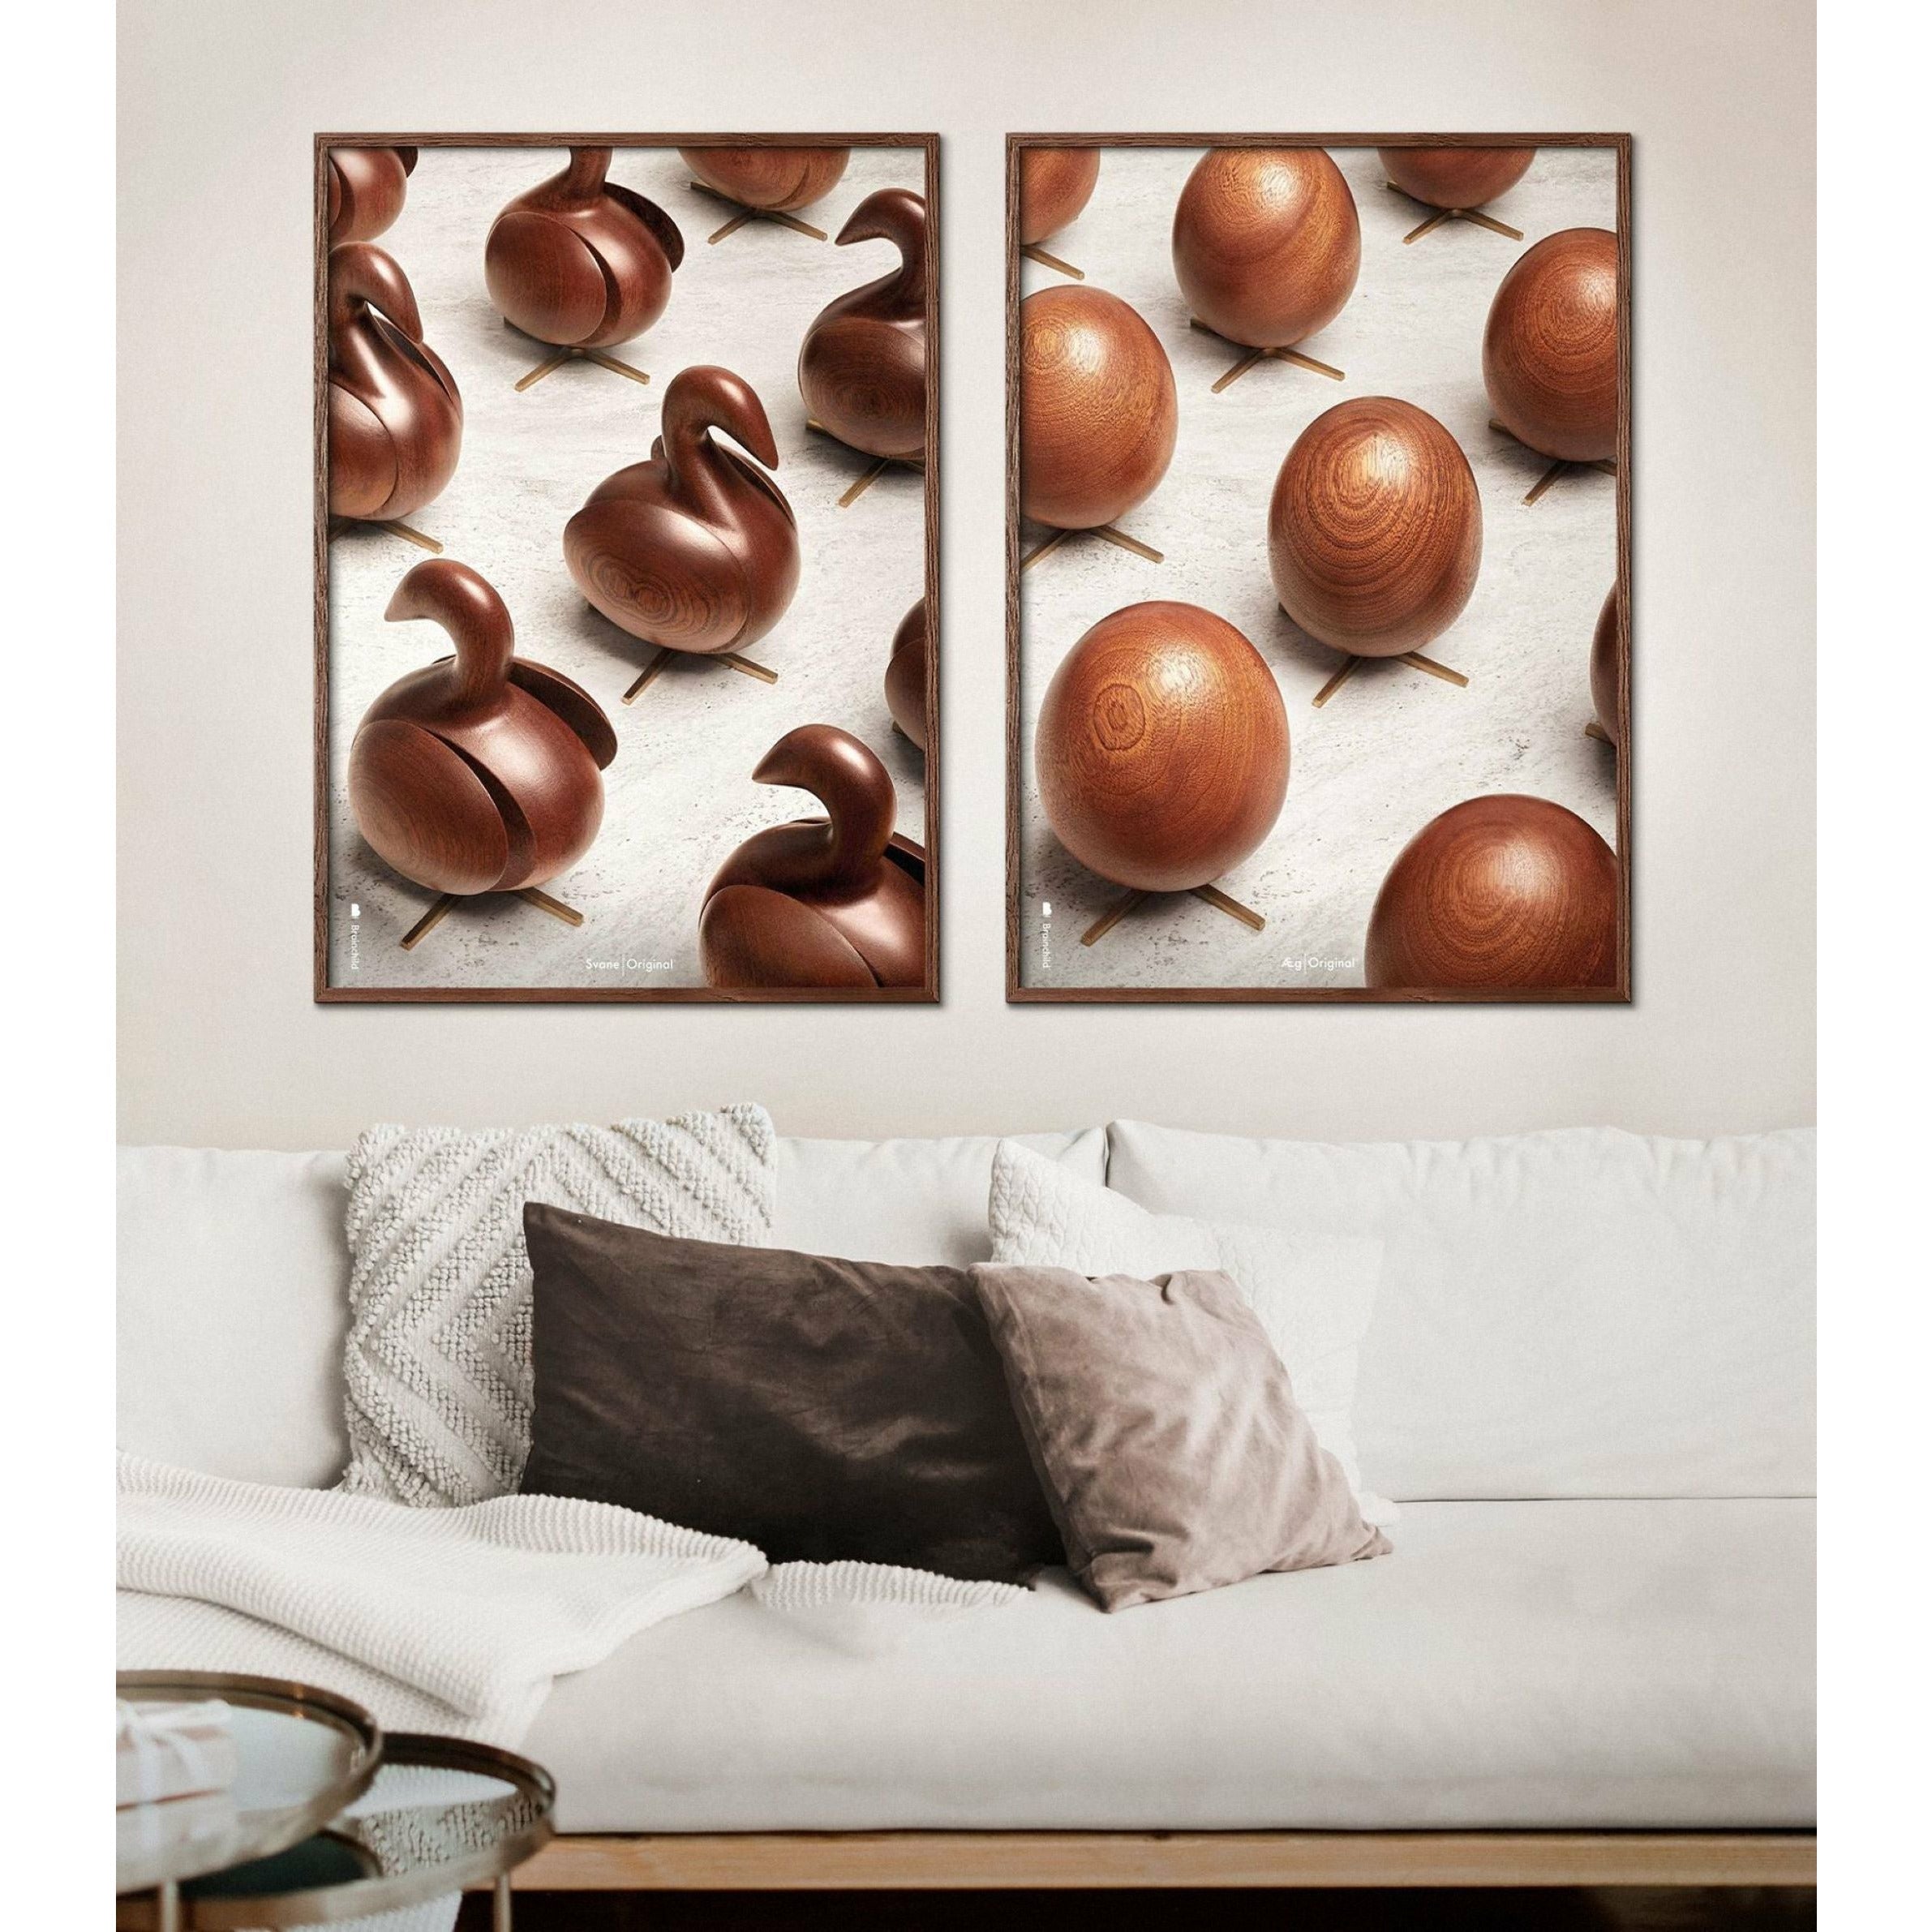 Brainchild Eierparade Poster, Frame Made Of Black Lacquered Wood, 70x100 Cm